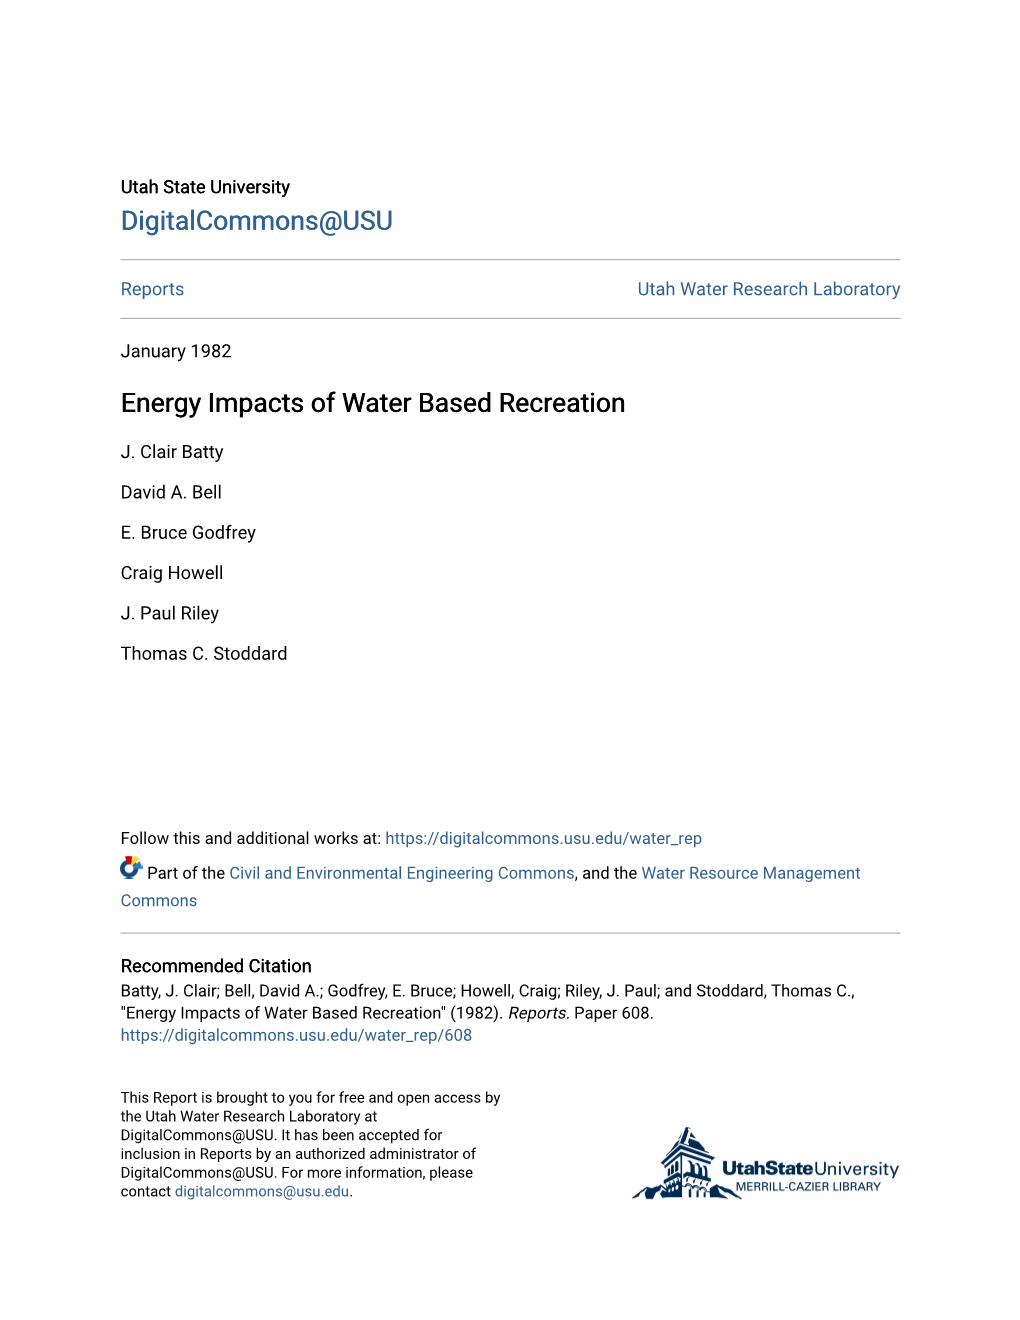 Energy Impacts of Water Based Recreation